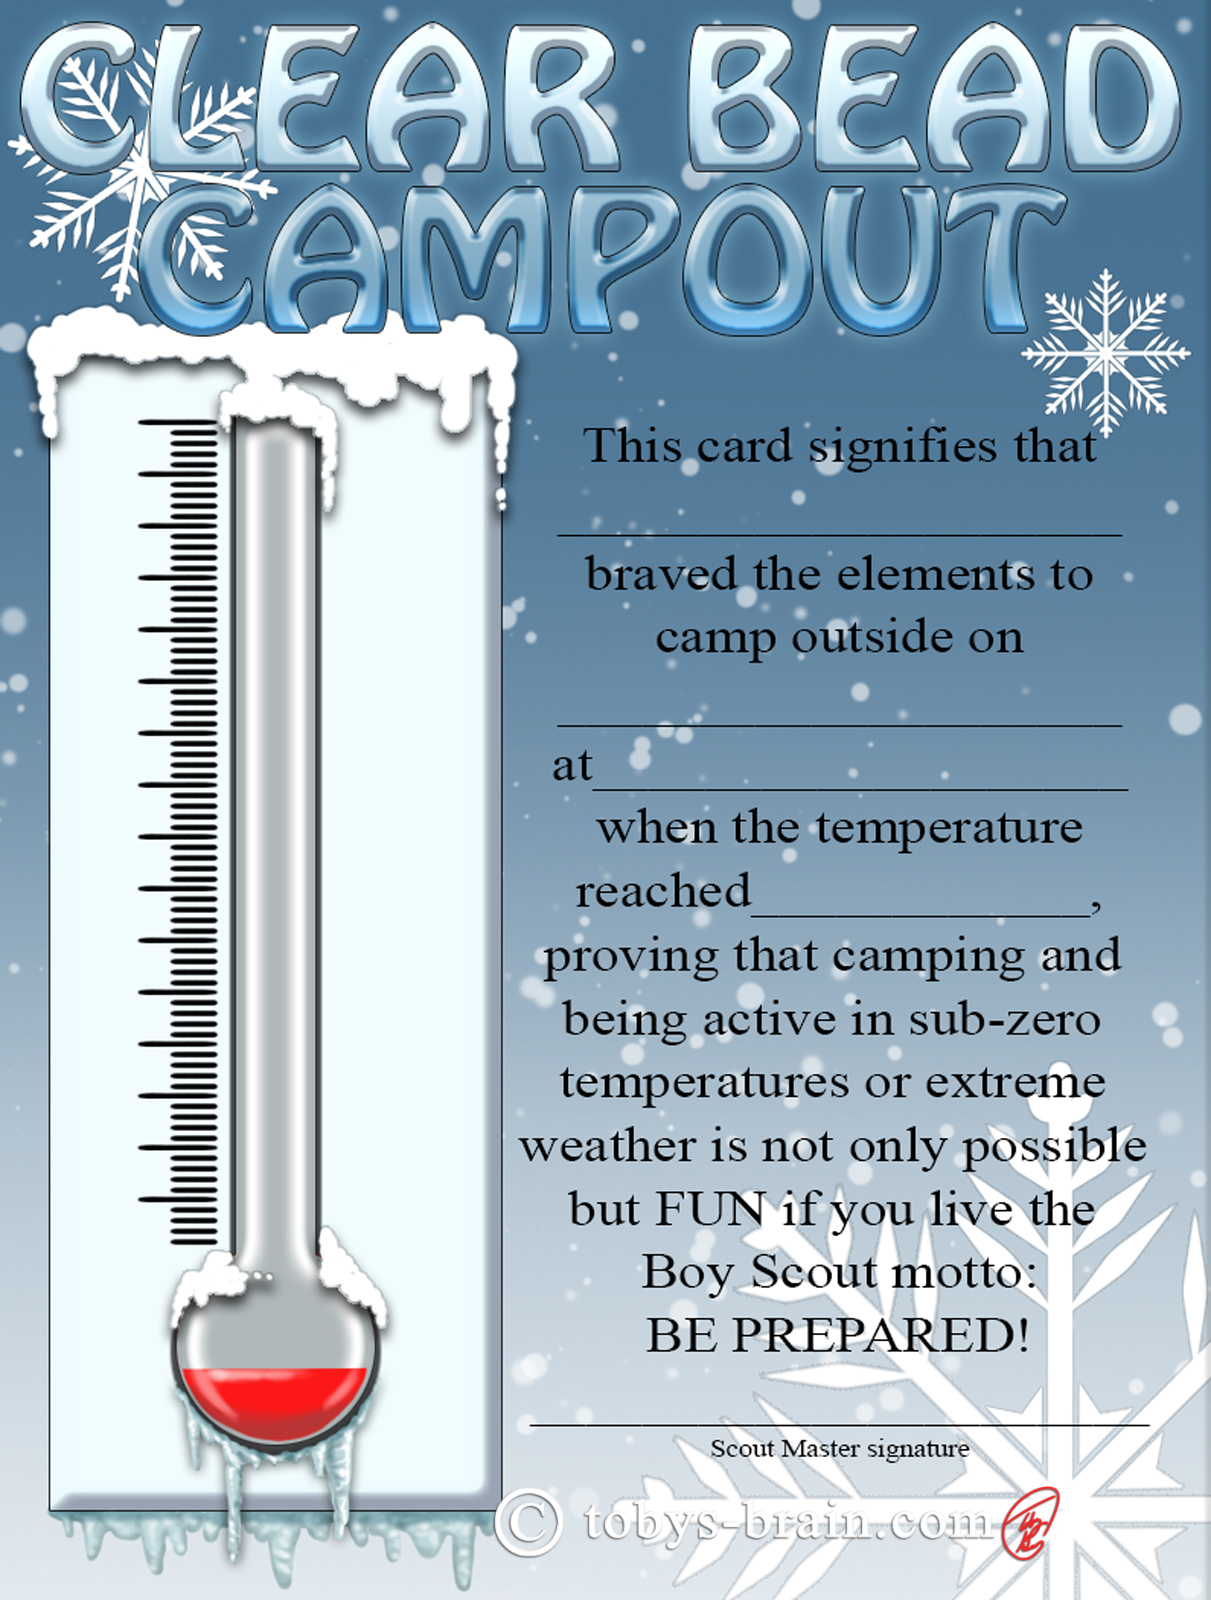 Toby-Gray-freezeout-campout-card-2